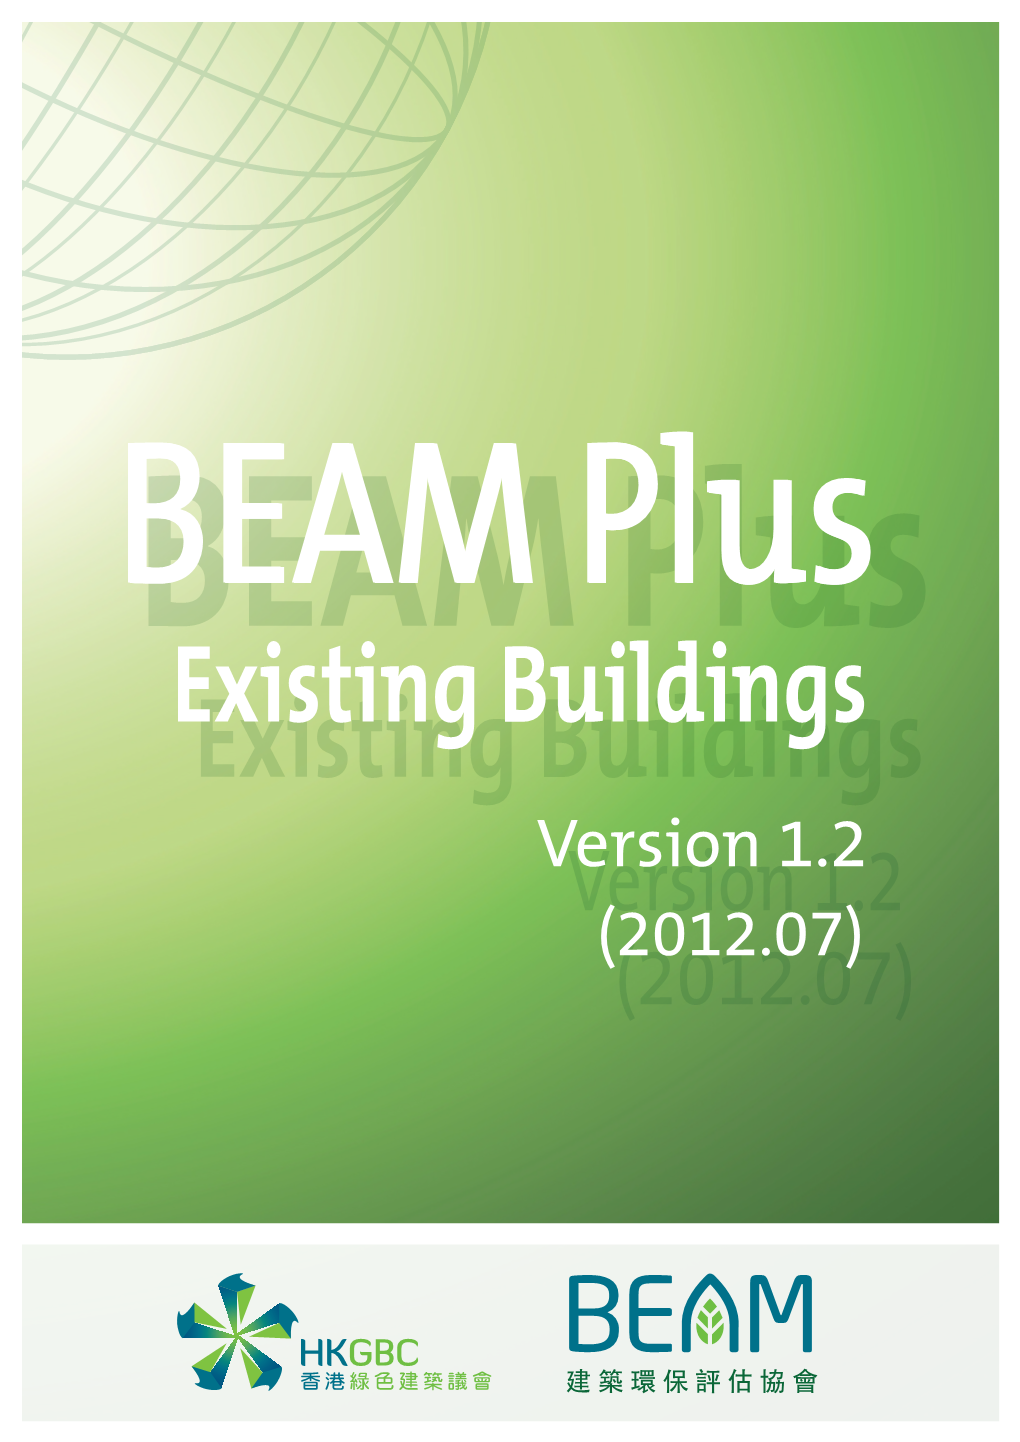 BEAM Plus for Existing Buildings Version